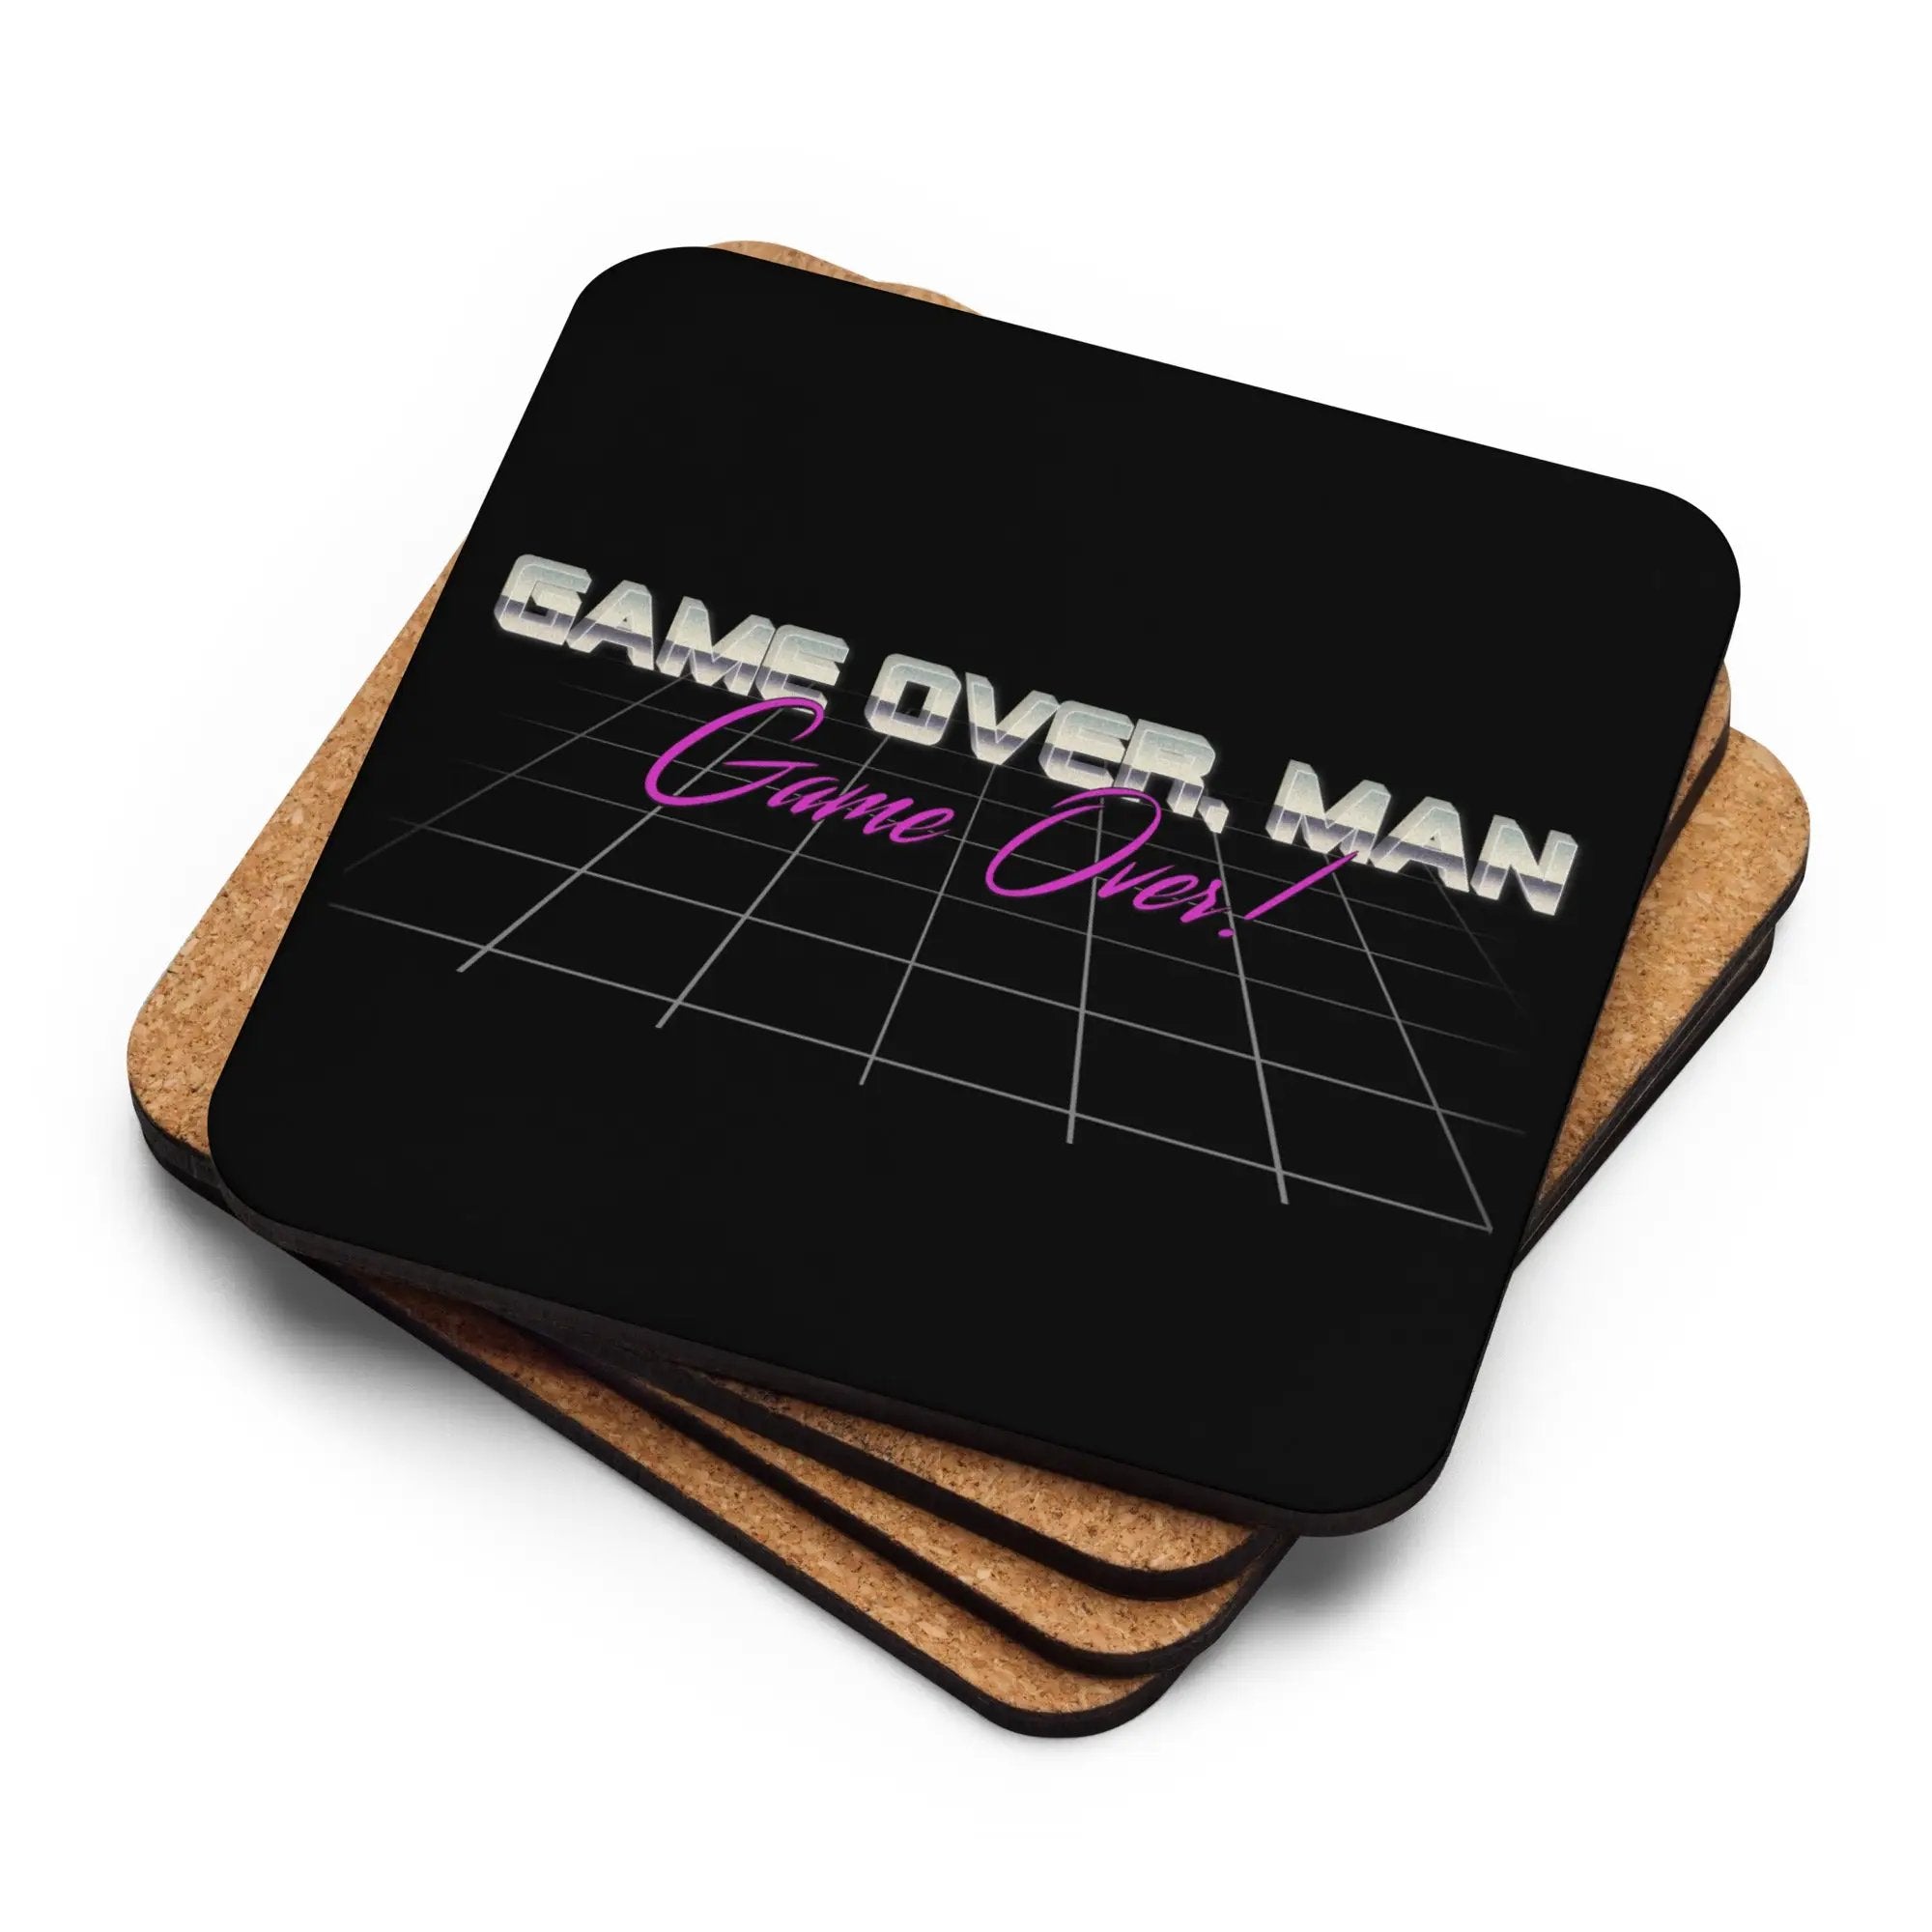 a coaster with a game over man on it